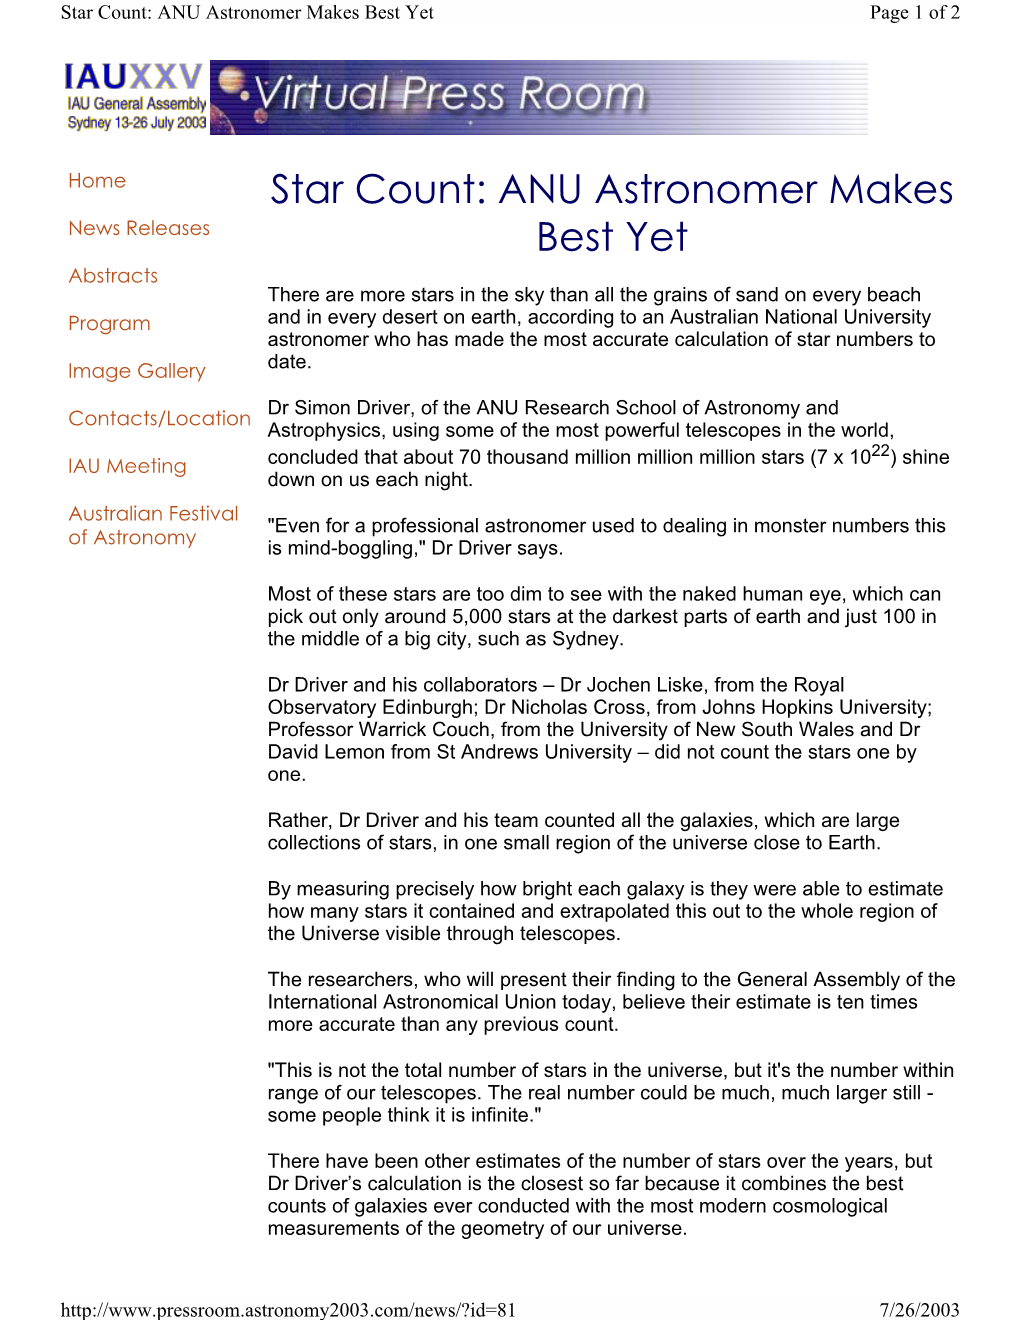 Star Count: ANU Astronomer Makes Best Yet Page 1 of 2